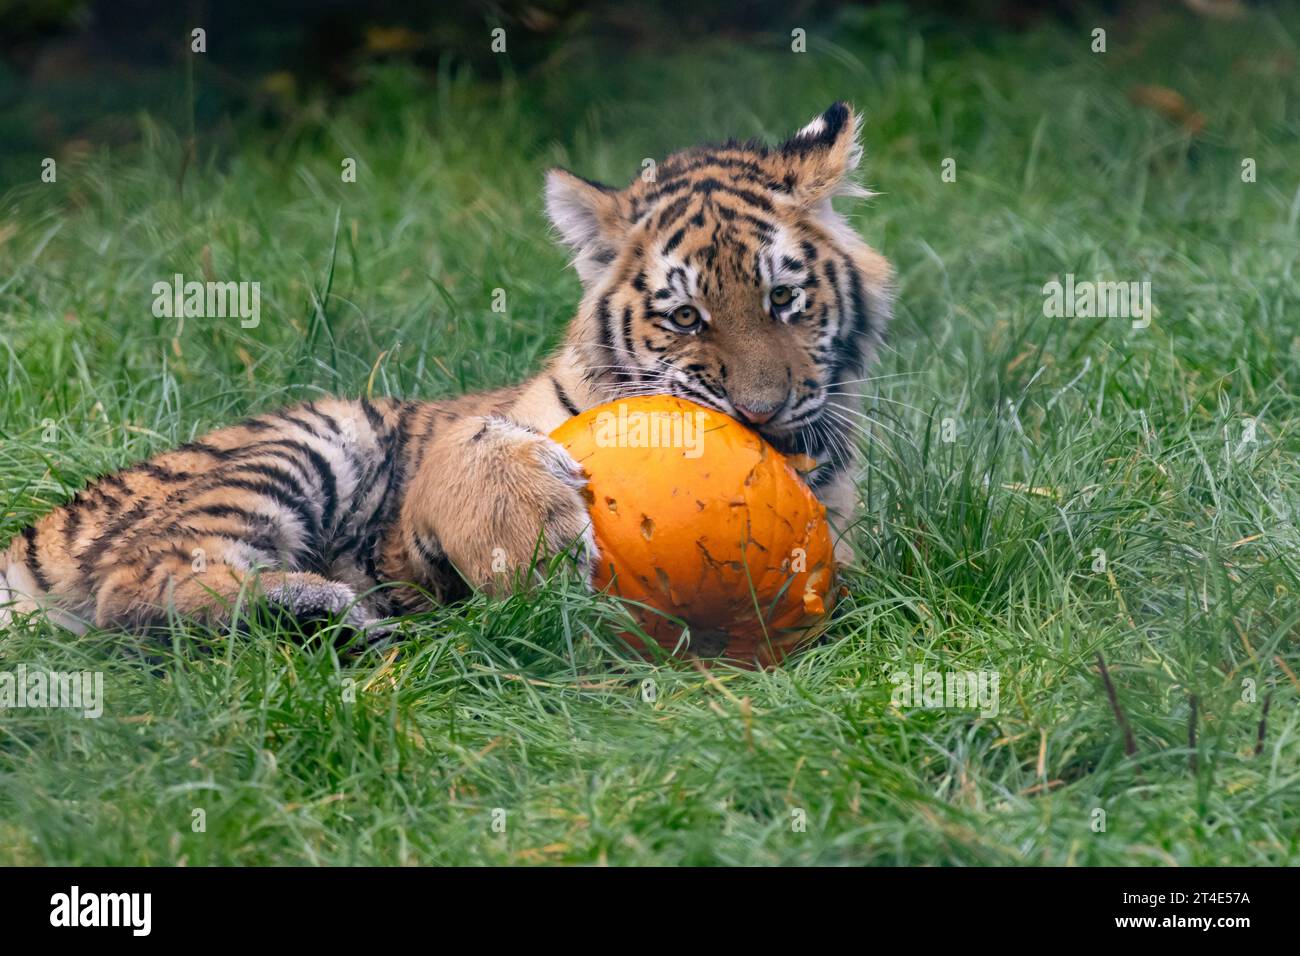 The tiger cub snacking on the pumpkin BANHAM ZOO, NORFOLK, ENGLAND ADORABLE IMAGES of a five month old tiger cub playing with pumpkins have been captu Stock Photo